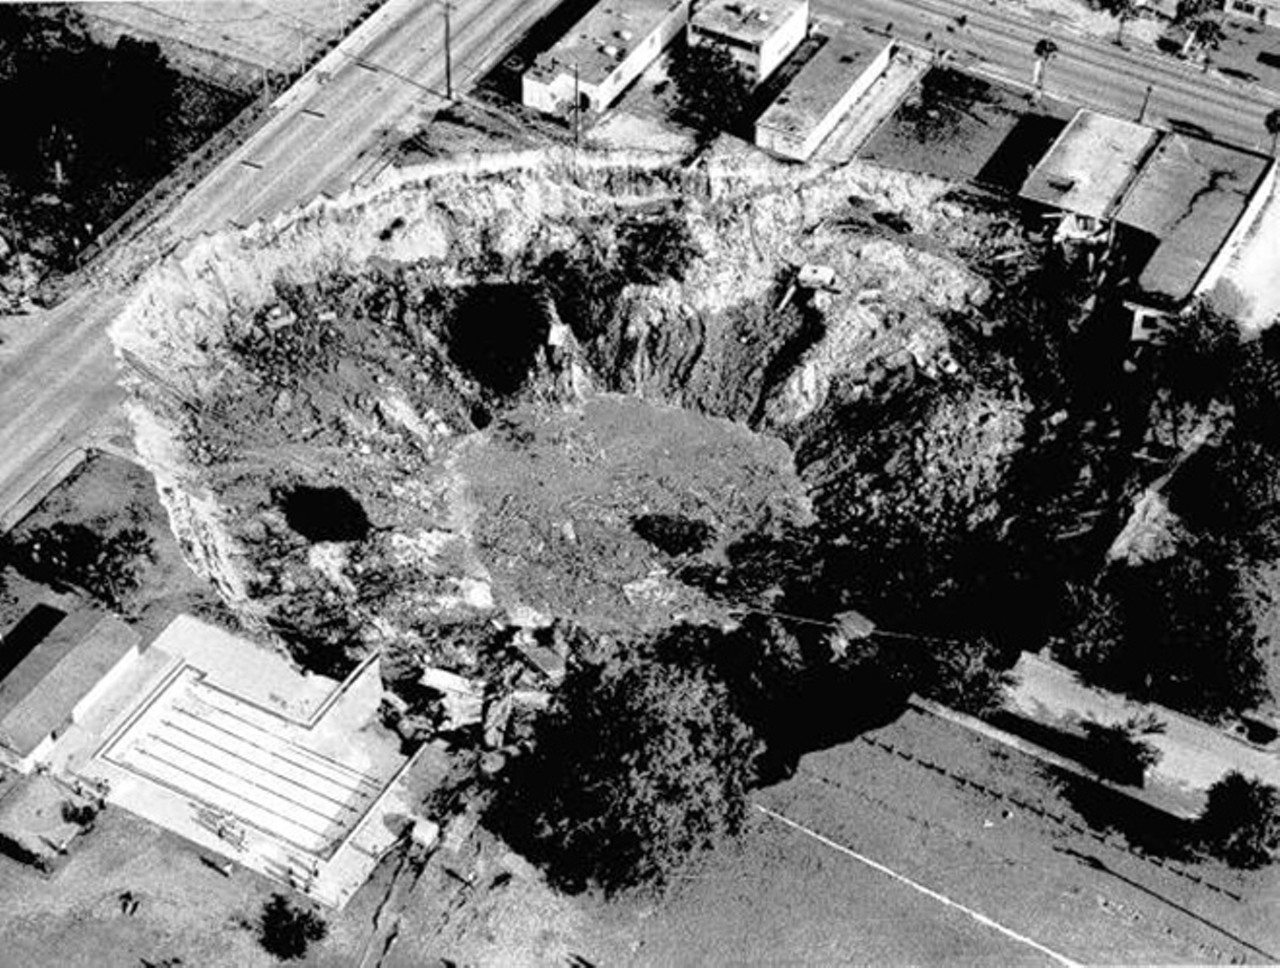 Sinkhole devastates Winter Park
May 8, 1981
By the time this bad boy stopped expanding, it was 350 feet wide and 75 feet deep. It swallowed up parts of Denning Drive and Fairbanks Avenue, as well as Mae Rose Williams&#146; three bedroom home. The city eventually stabilized the sinkhole with sand and water, and named it Lake Rose in Williams&#146; honor.
Photo via State Archives of Florida